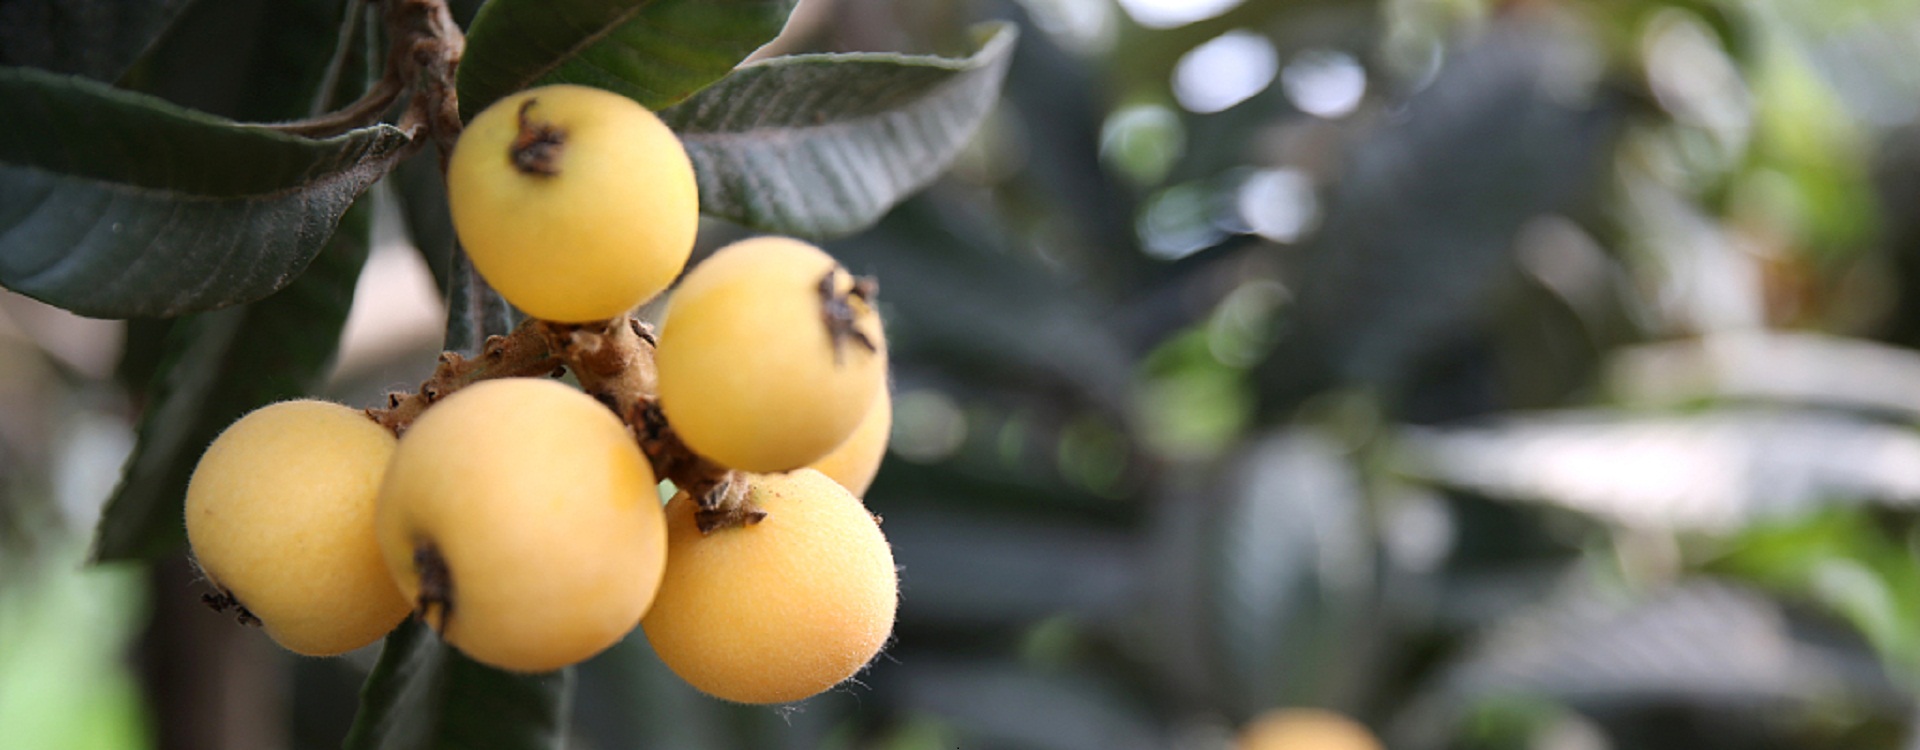 Quench your thirst with sweet and juicy loquats